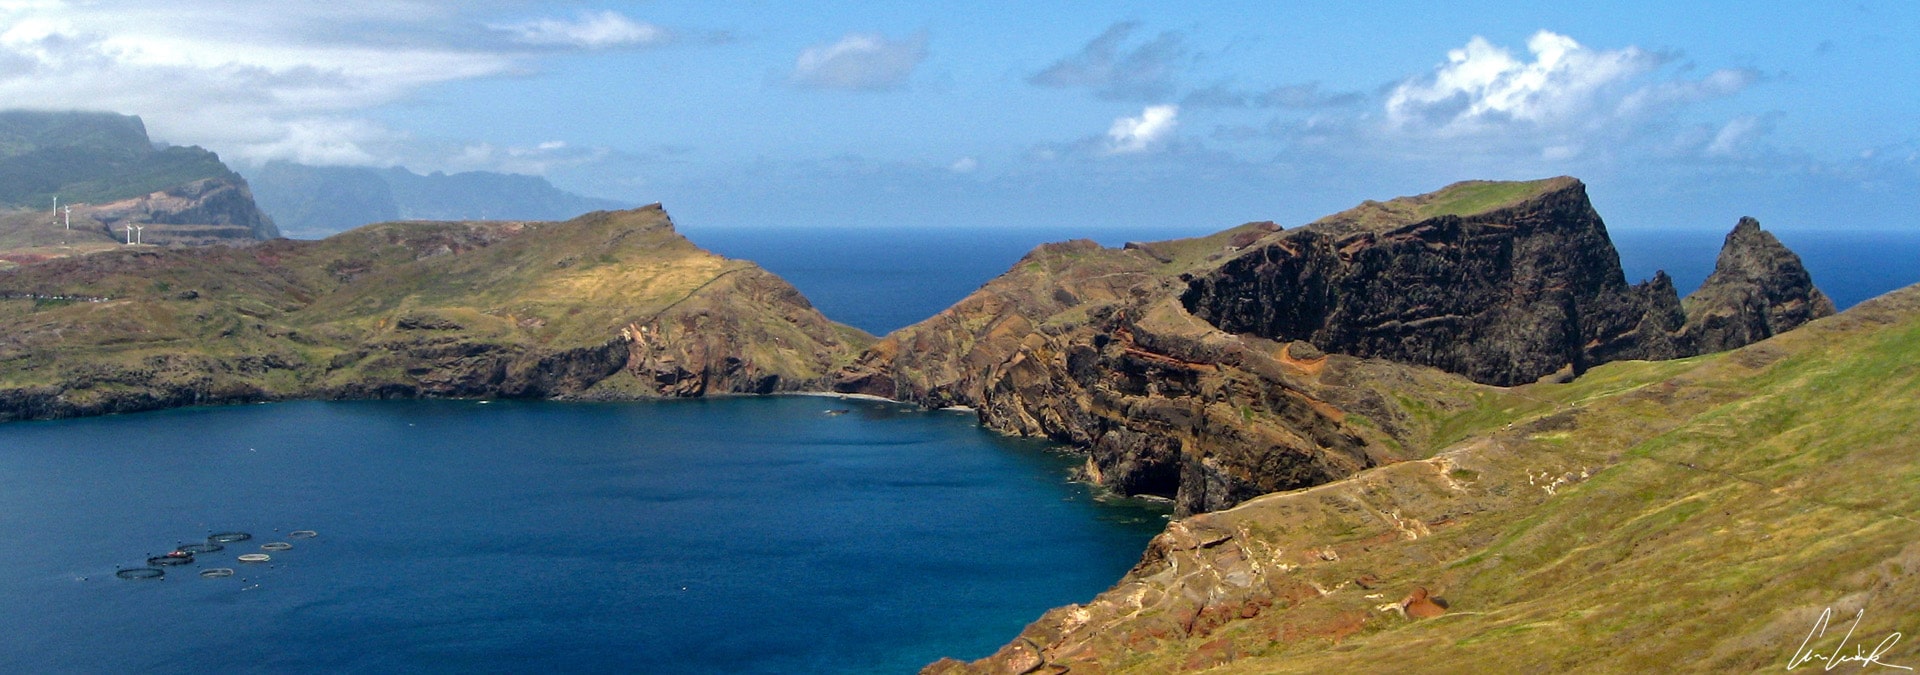 The peninsula of São Lourenço, of volcanic origin, is wild. The absence of trees has allowed the development of a rare low endemic vegetation that contrasts with the blue of the ocean.